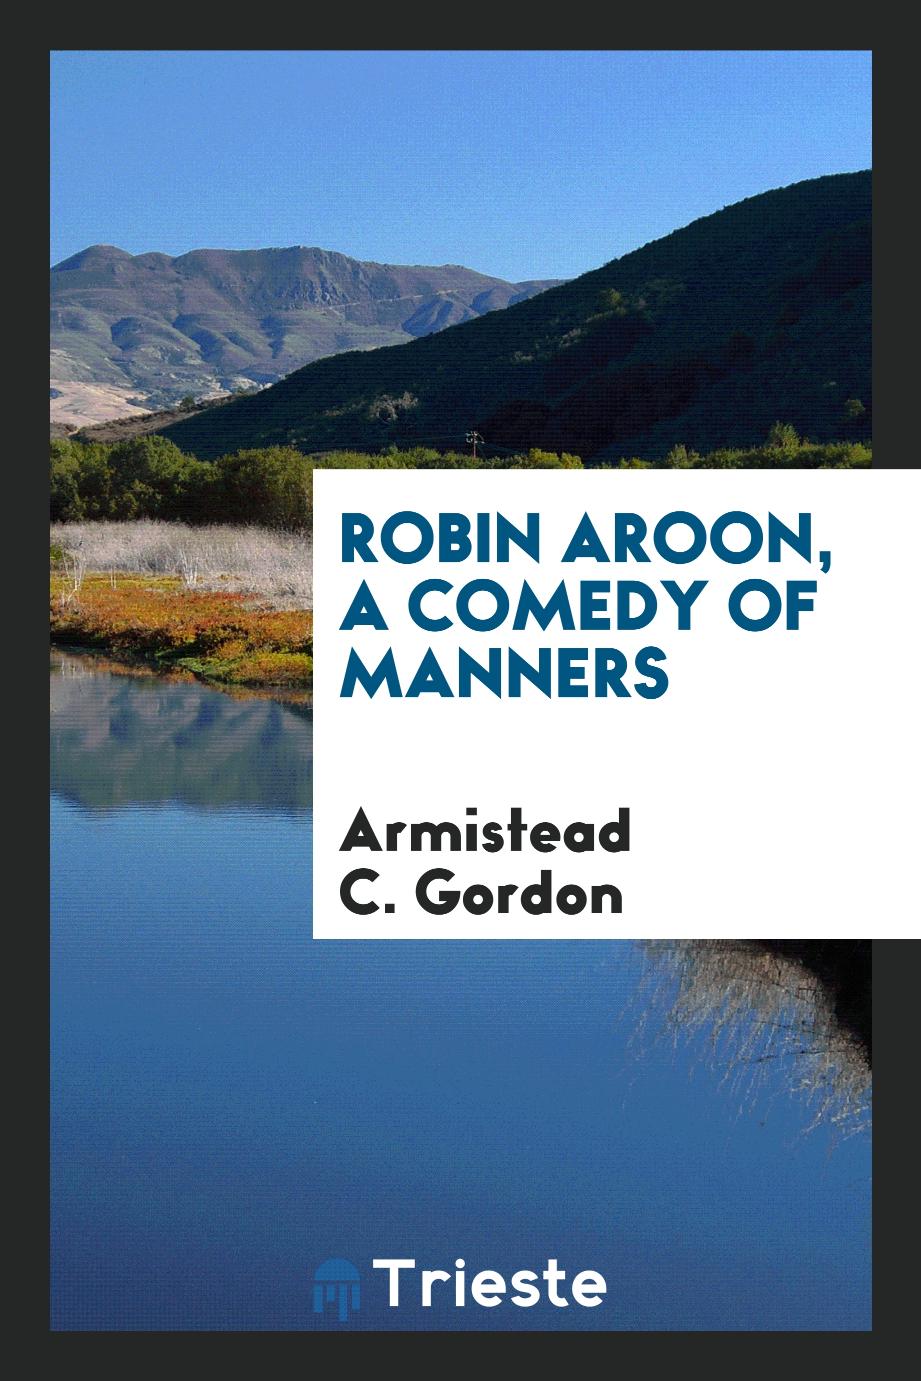 Robin Aroon, a comedy of manners